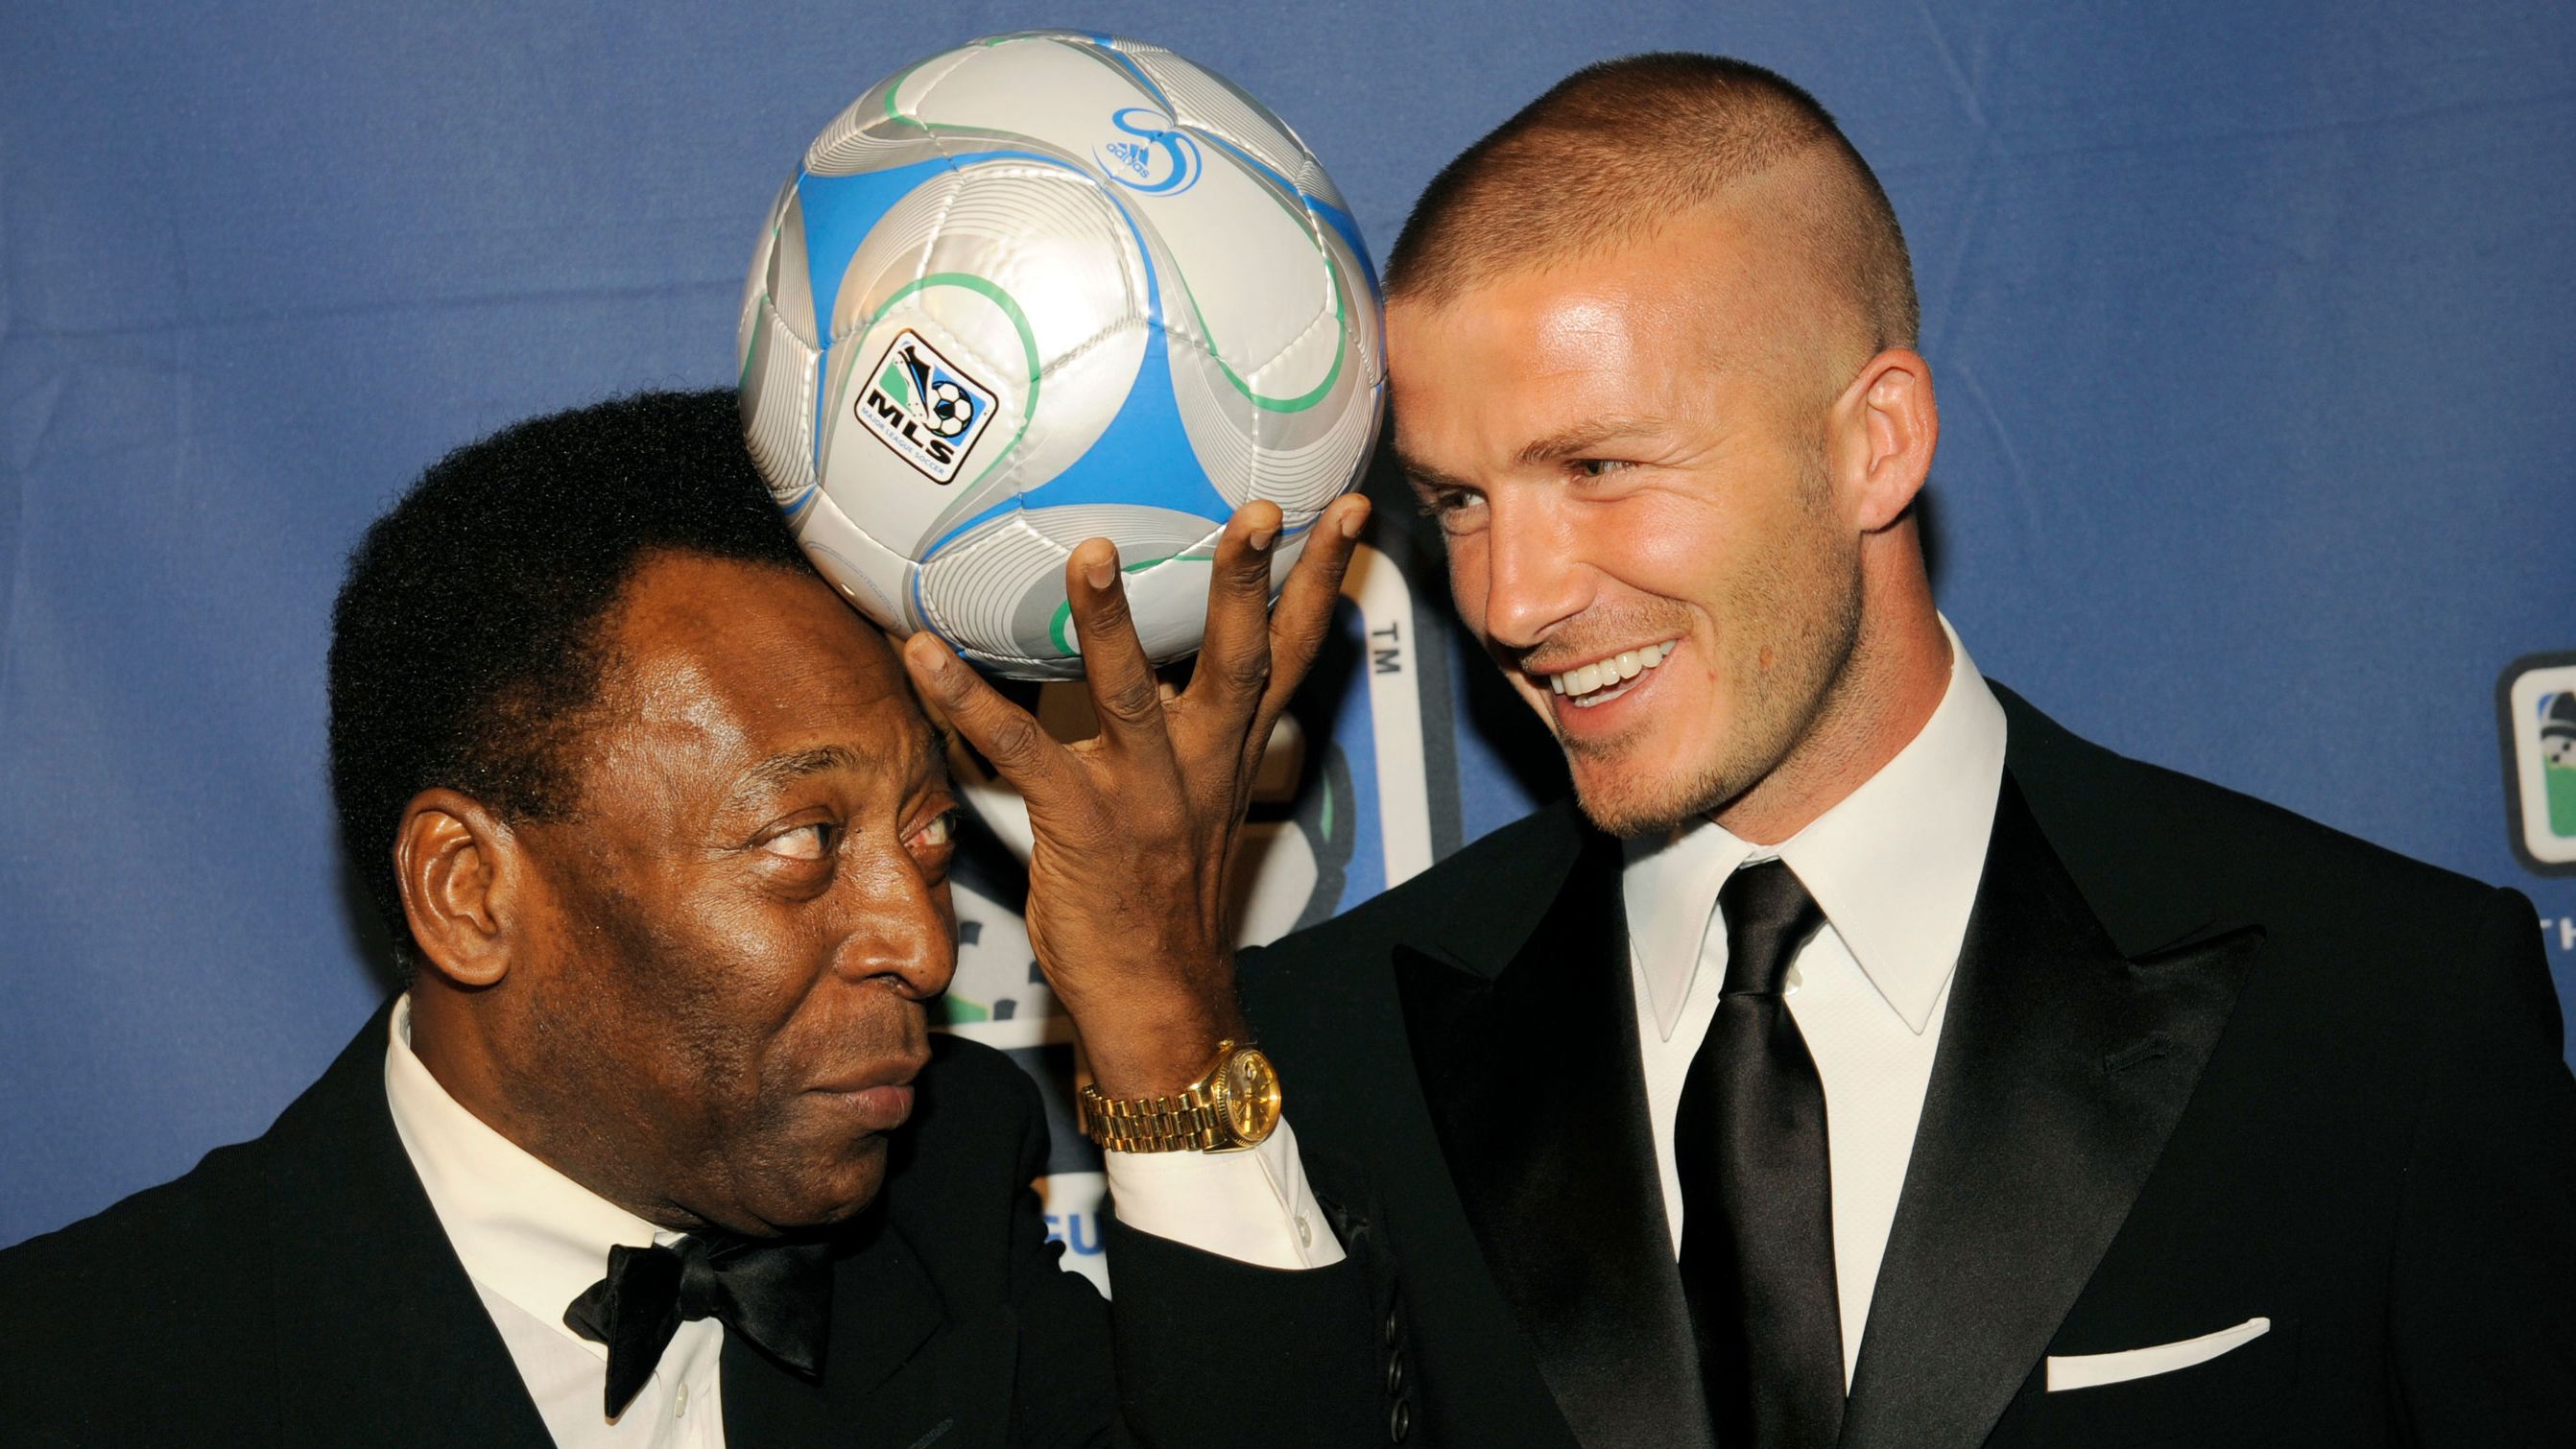 Pelé and English soccer star David Beckham attend a gala benefit celebrating soccer in the United States in 2008.